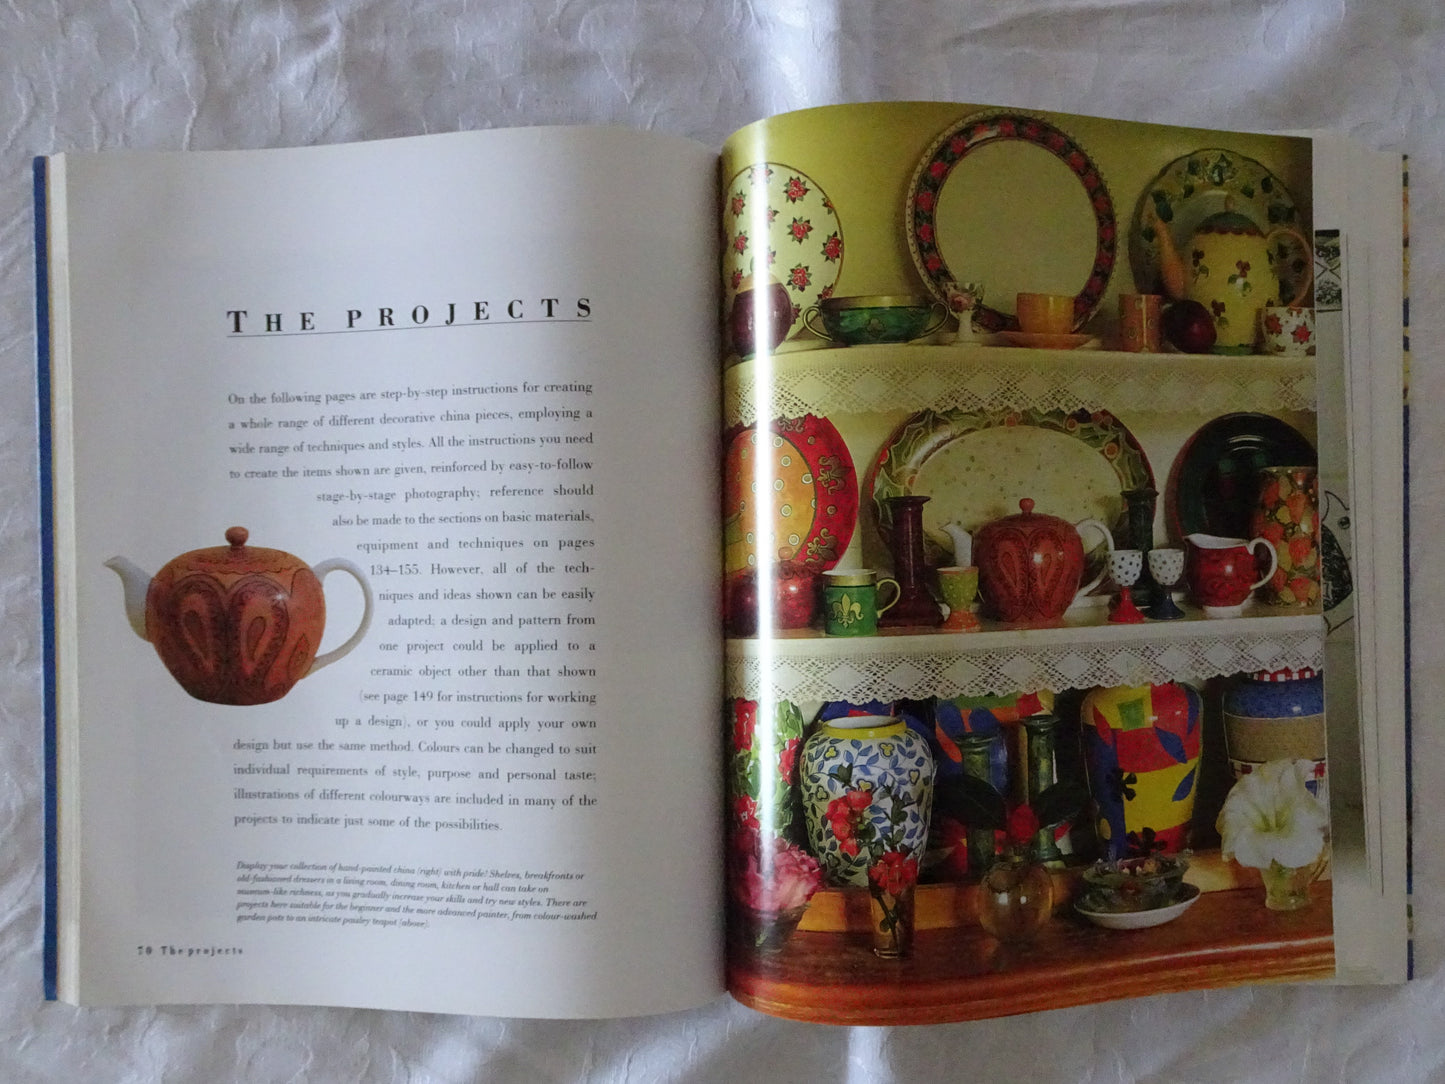 Hand-Painting China by Lesley Harle and Susan Conder